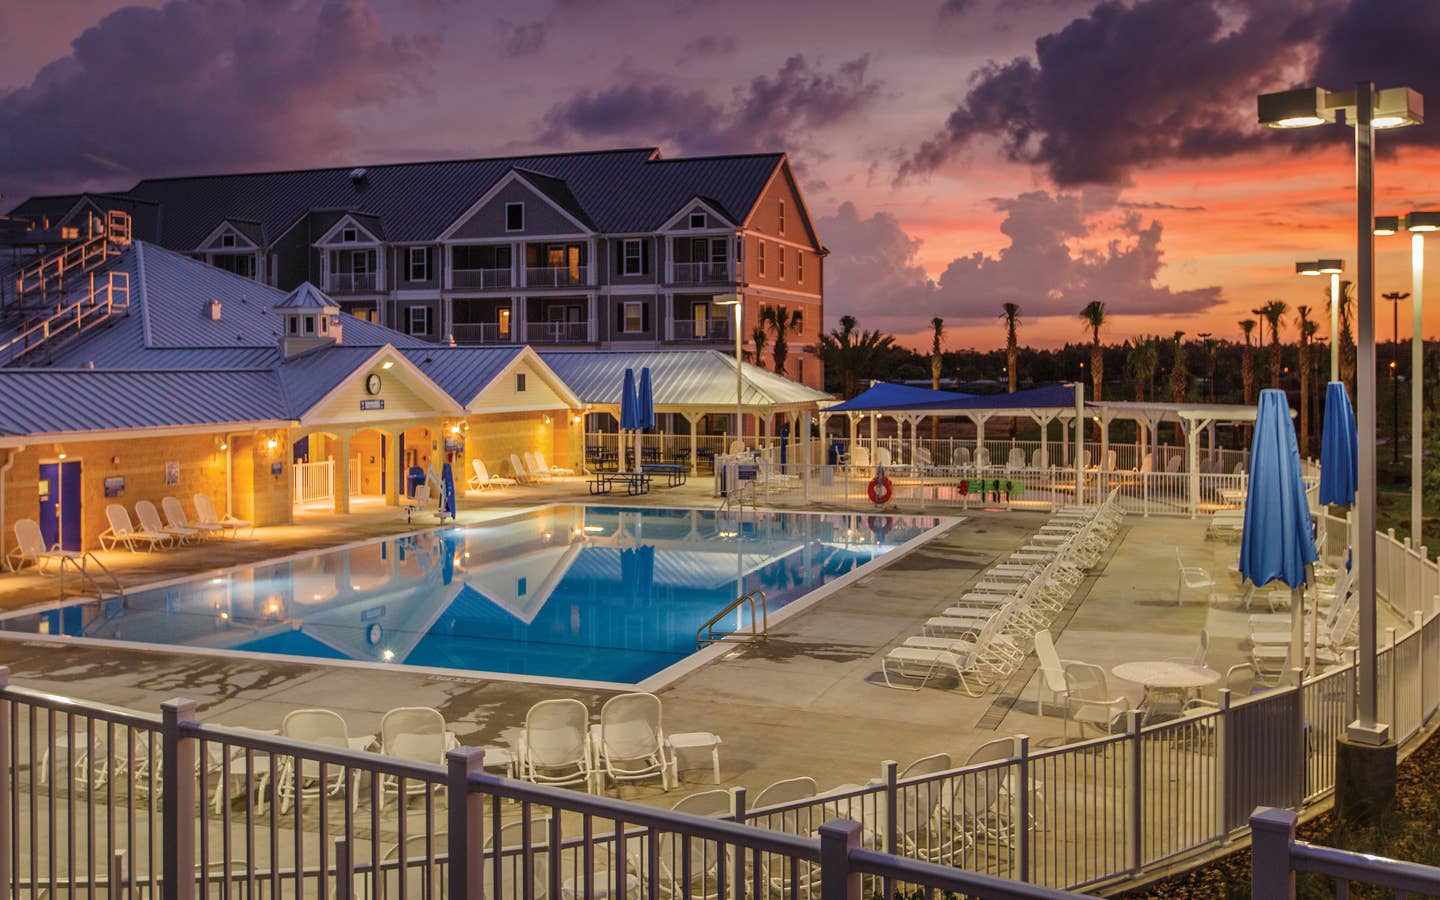 Orlando Breeze Resort property building and swimming pool in Florida.